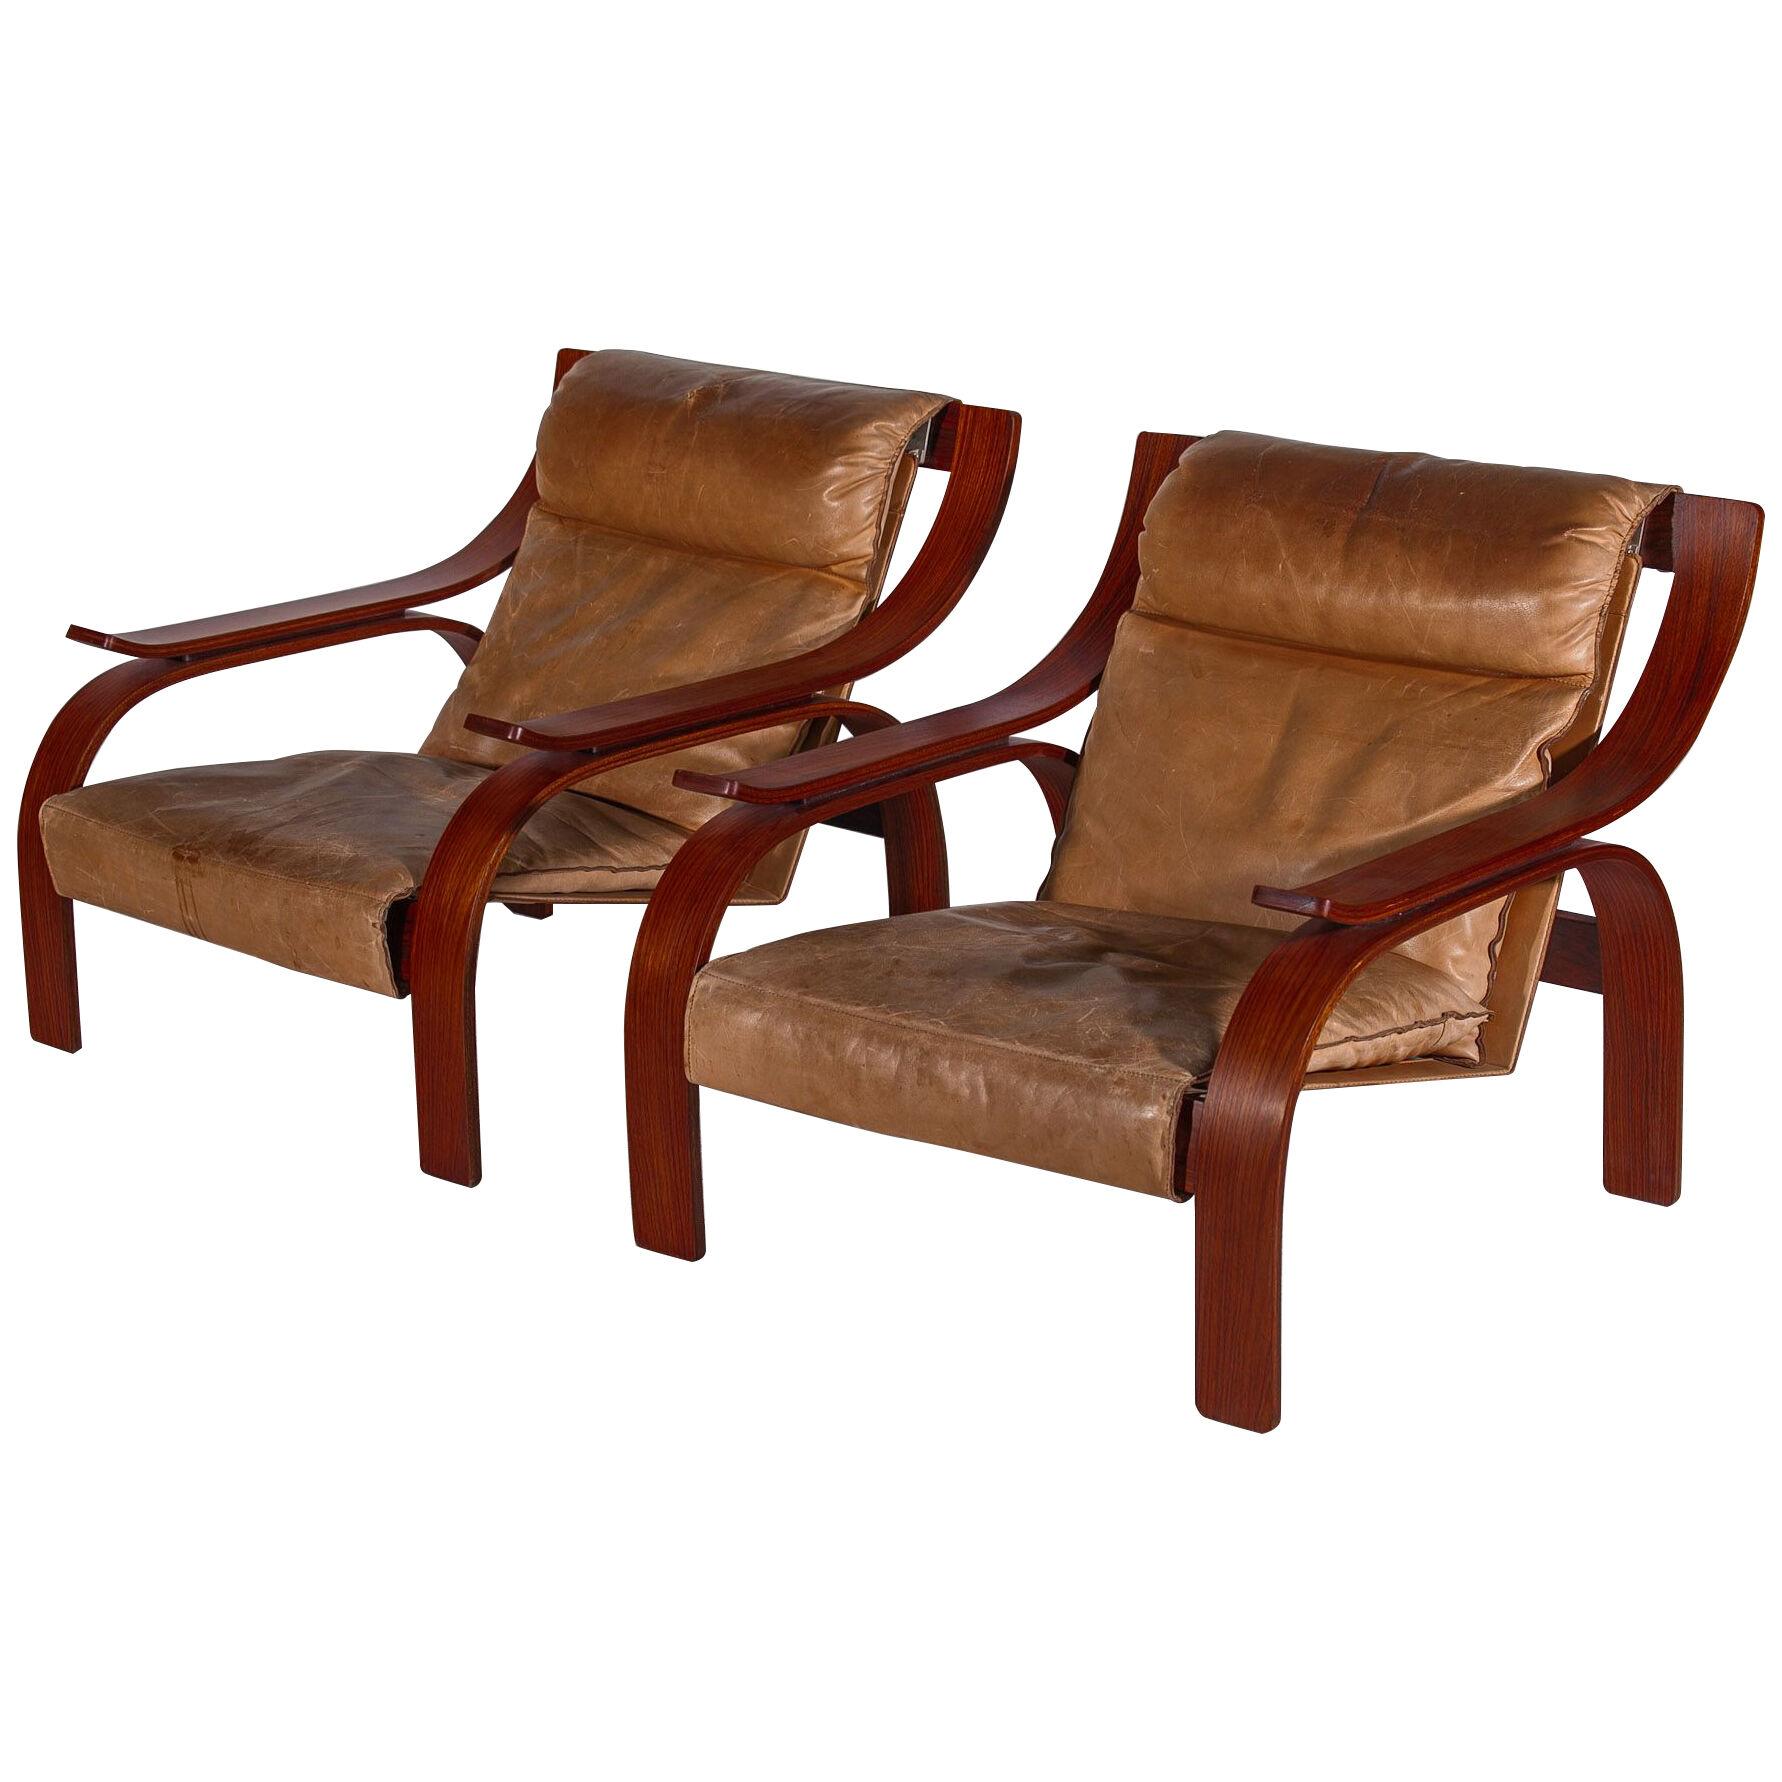 Set of Two Lounge Chairs designed by Marco Zanuso, 1962 Italy, Model "Woodline"